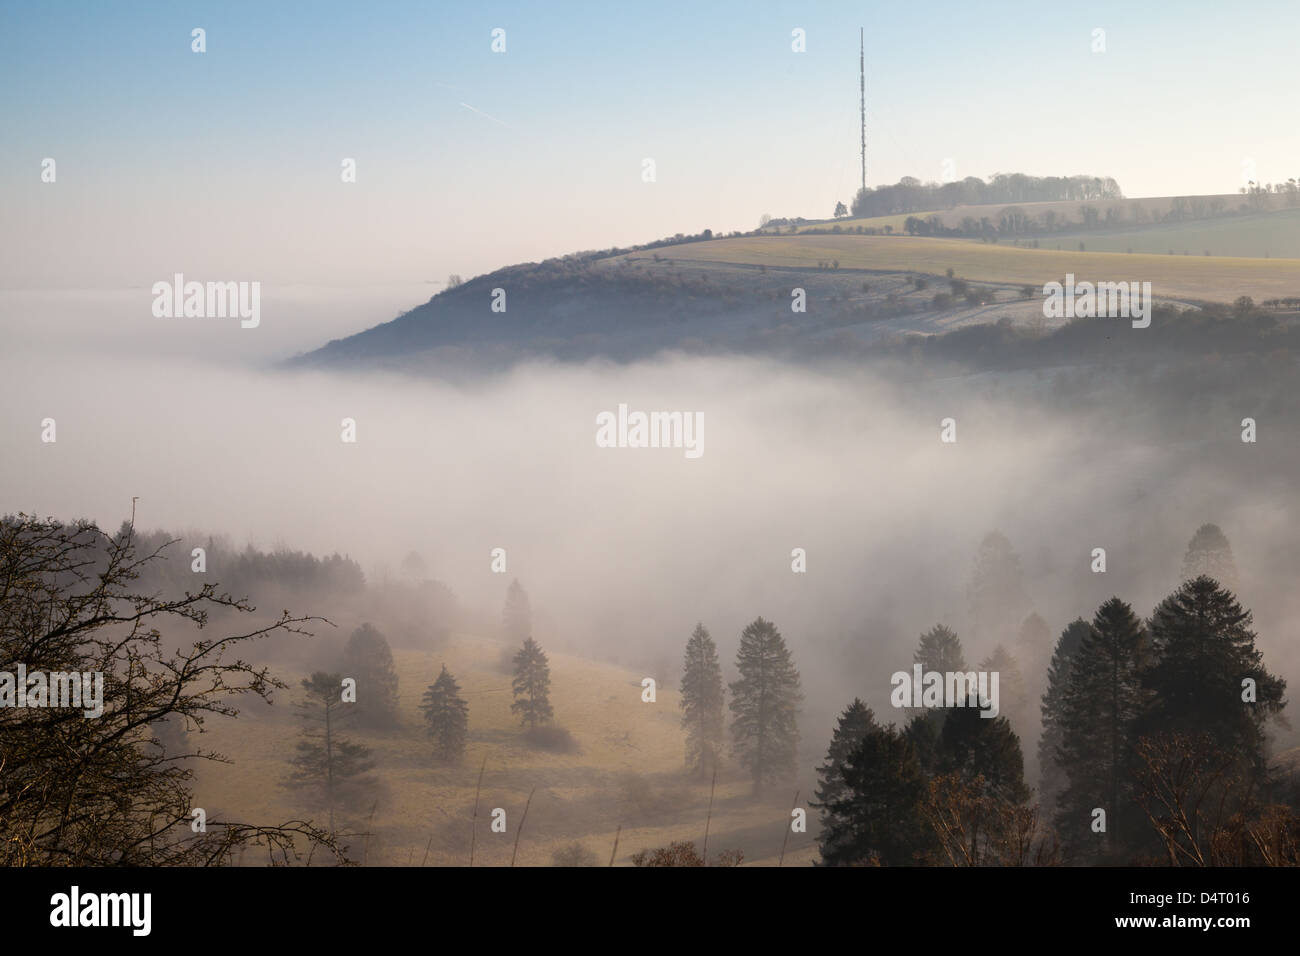 A morning view of Hannington Television mast on Cottington Hill in Hampshire seen from the Wayfarer's Walk on Cannon Heath Down Stock Photo